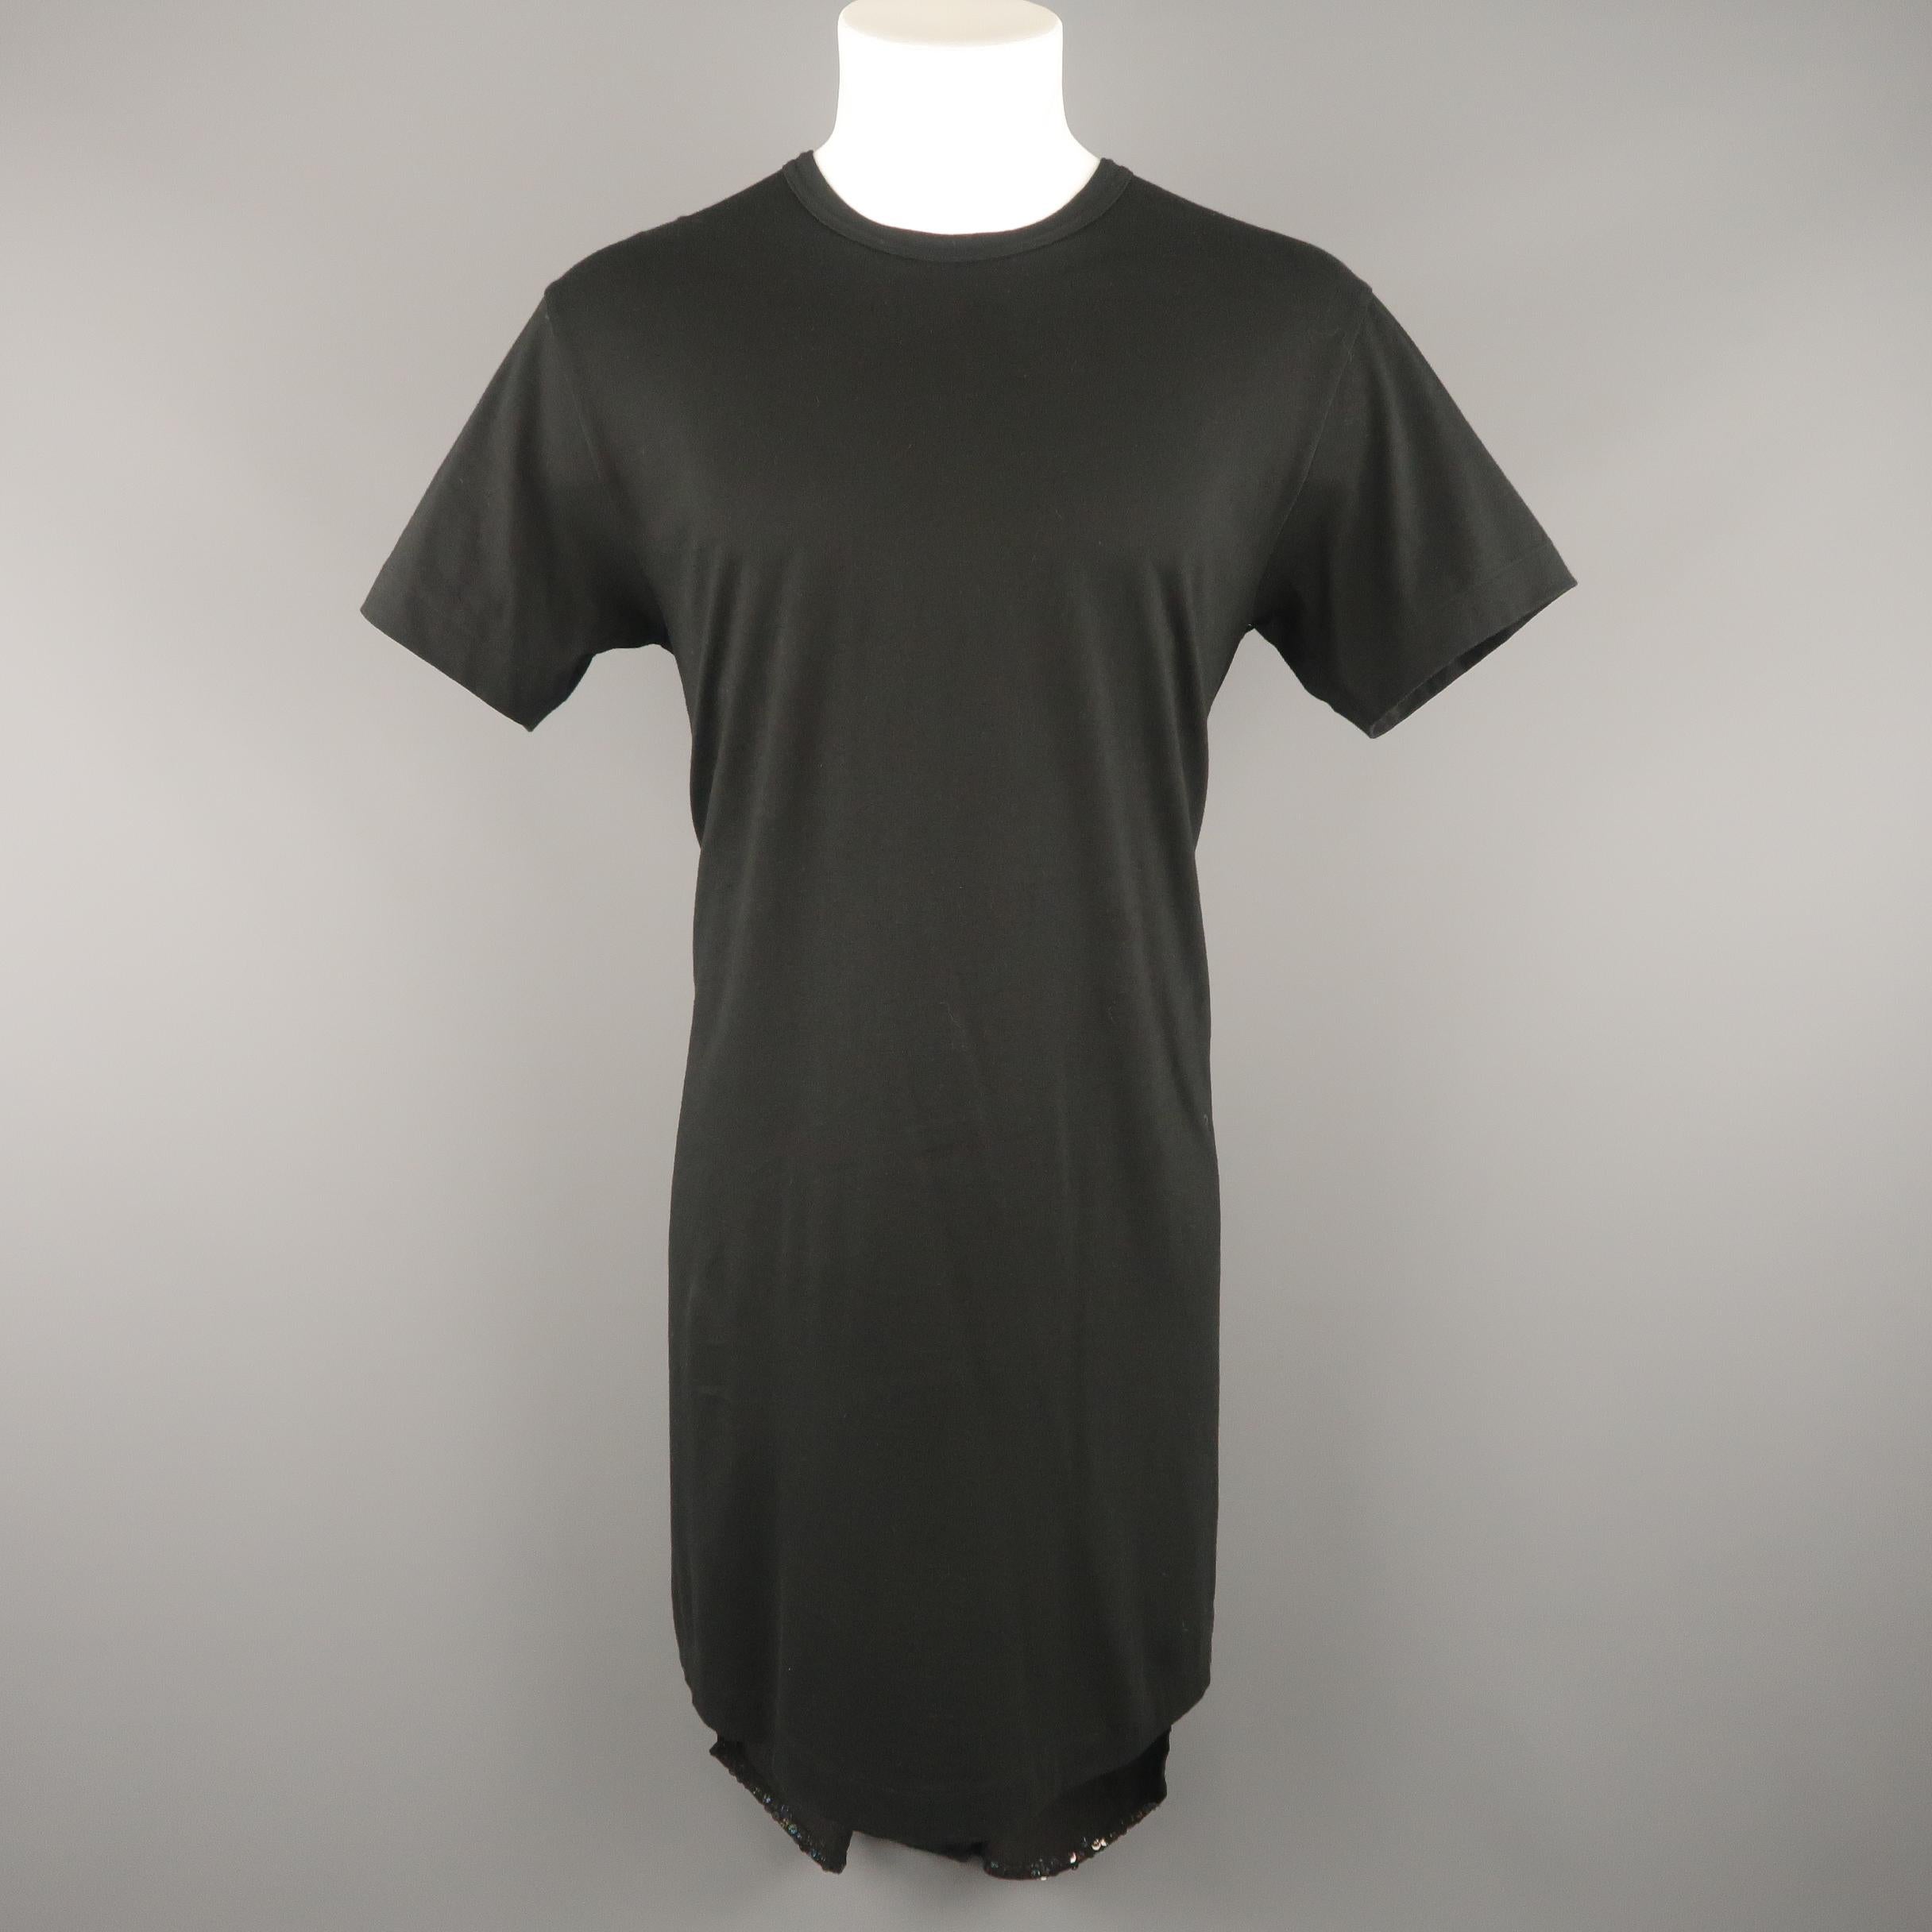 COMME des GARCONS HOMME PLUS T-shirt comes in black cotton jersey with a crewneck, long hem, and holographic sequin and velvet patchwork back. Made in Japan.
 
Excellent Pre-Owned Condition.
Marked: M
 
Measurements:
 
Shoulder: 19 in.
Chest: 41